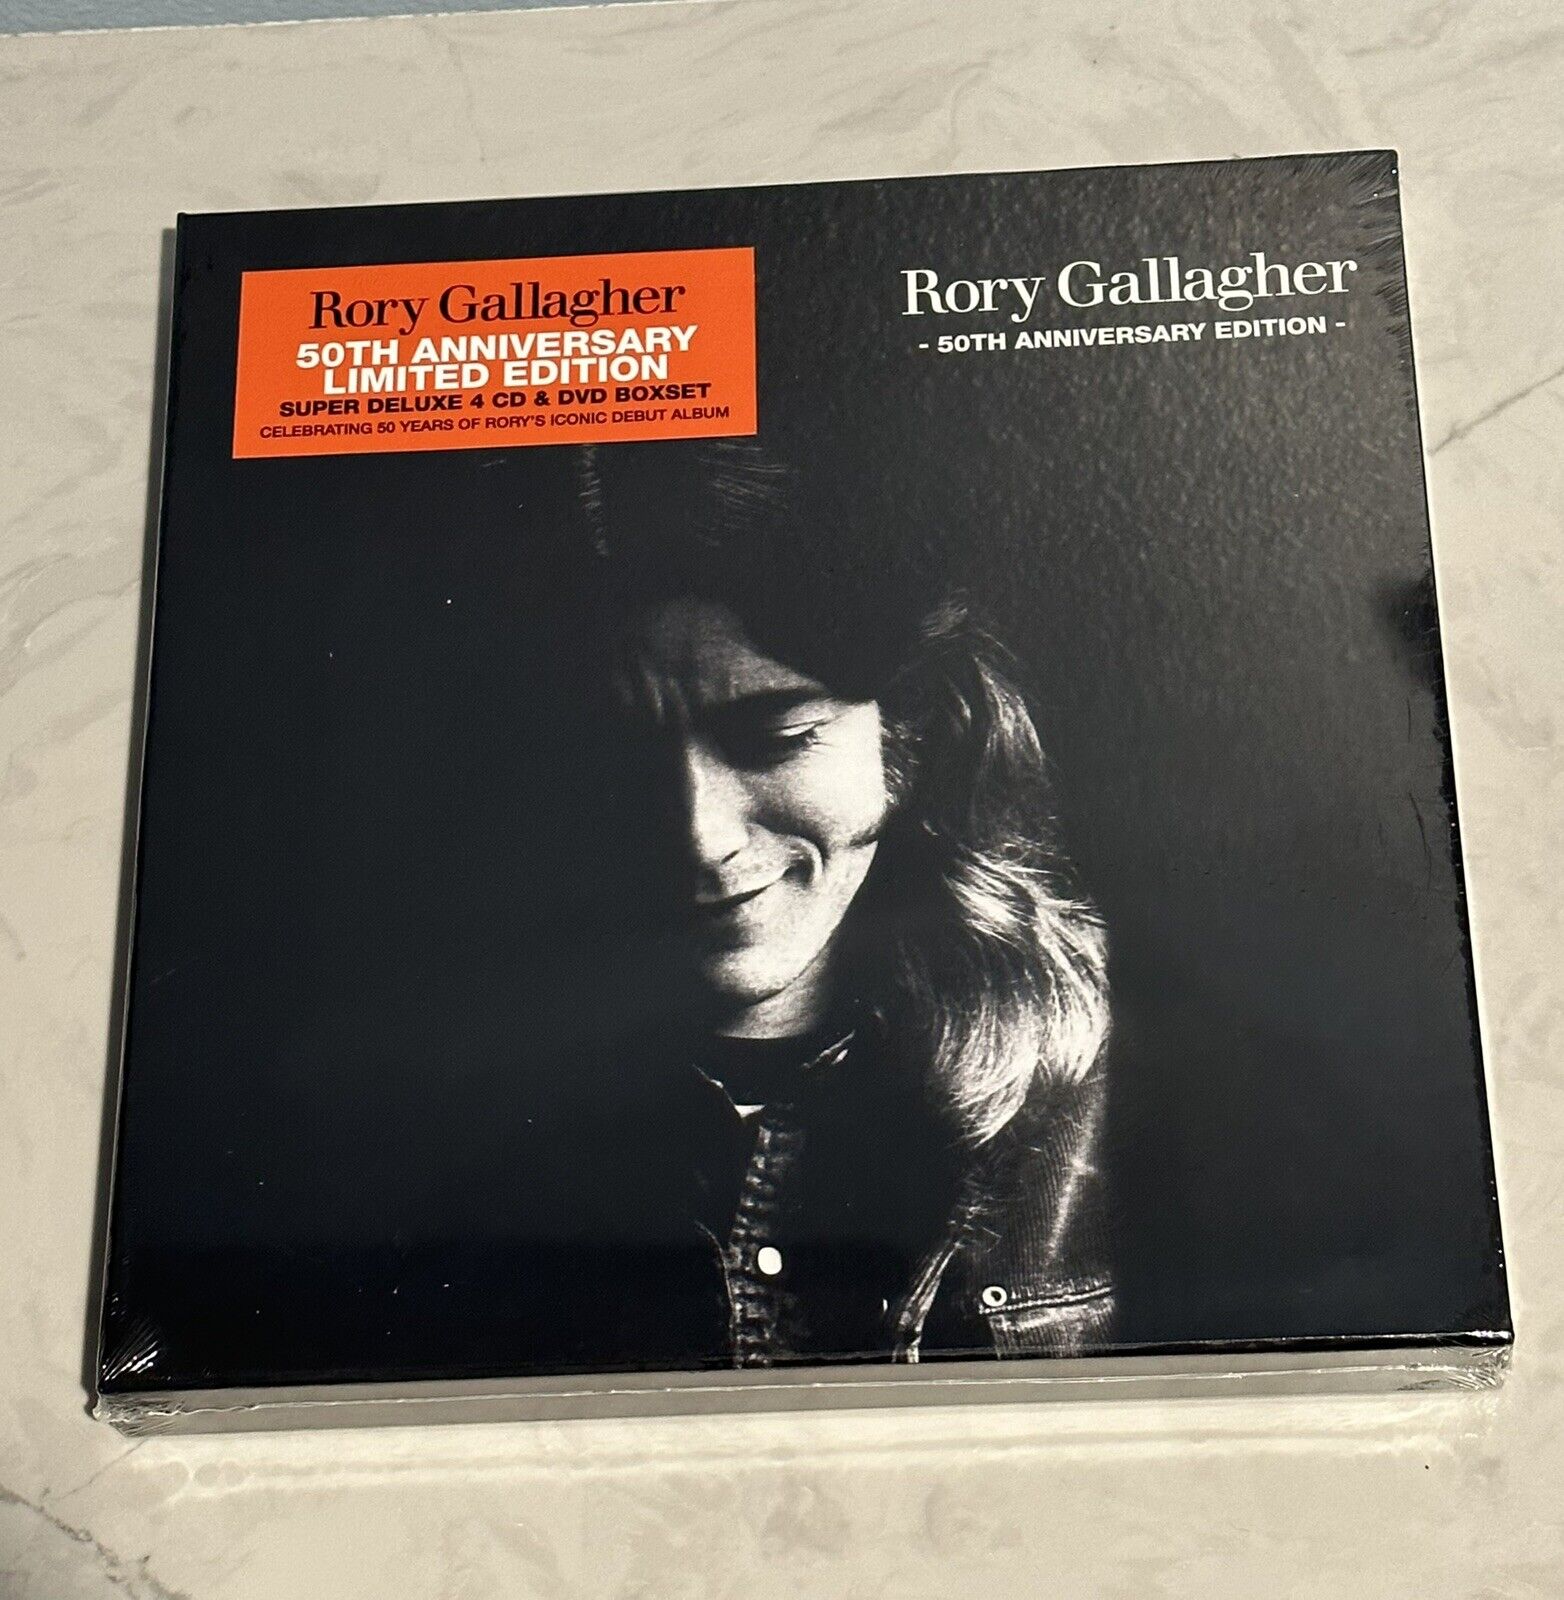 Rory Gallagher 50th Anniversary Limited Edition Super Deluxe CD & DVD Boxset